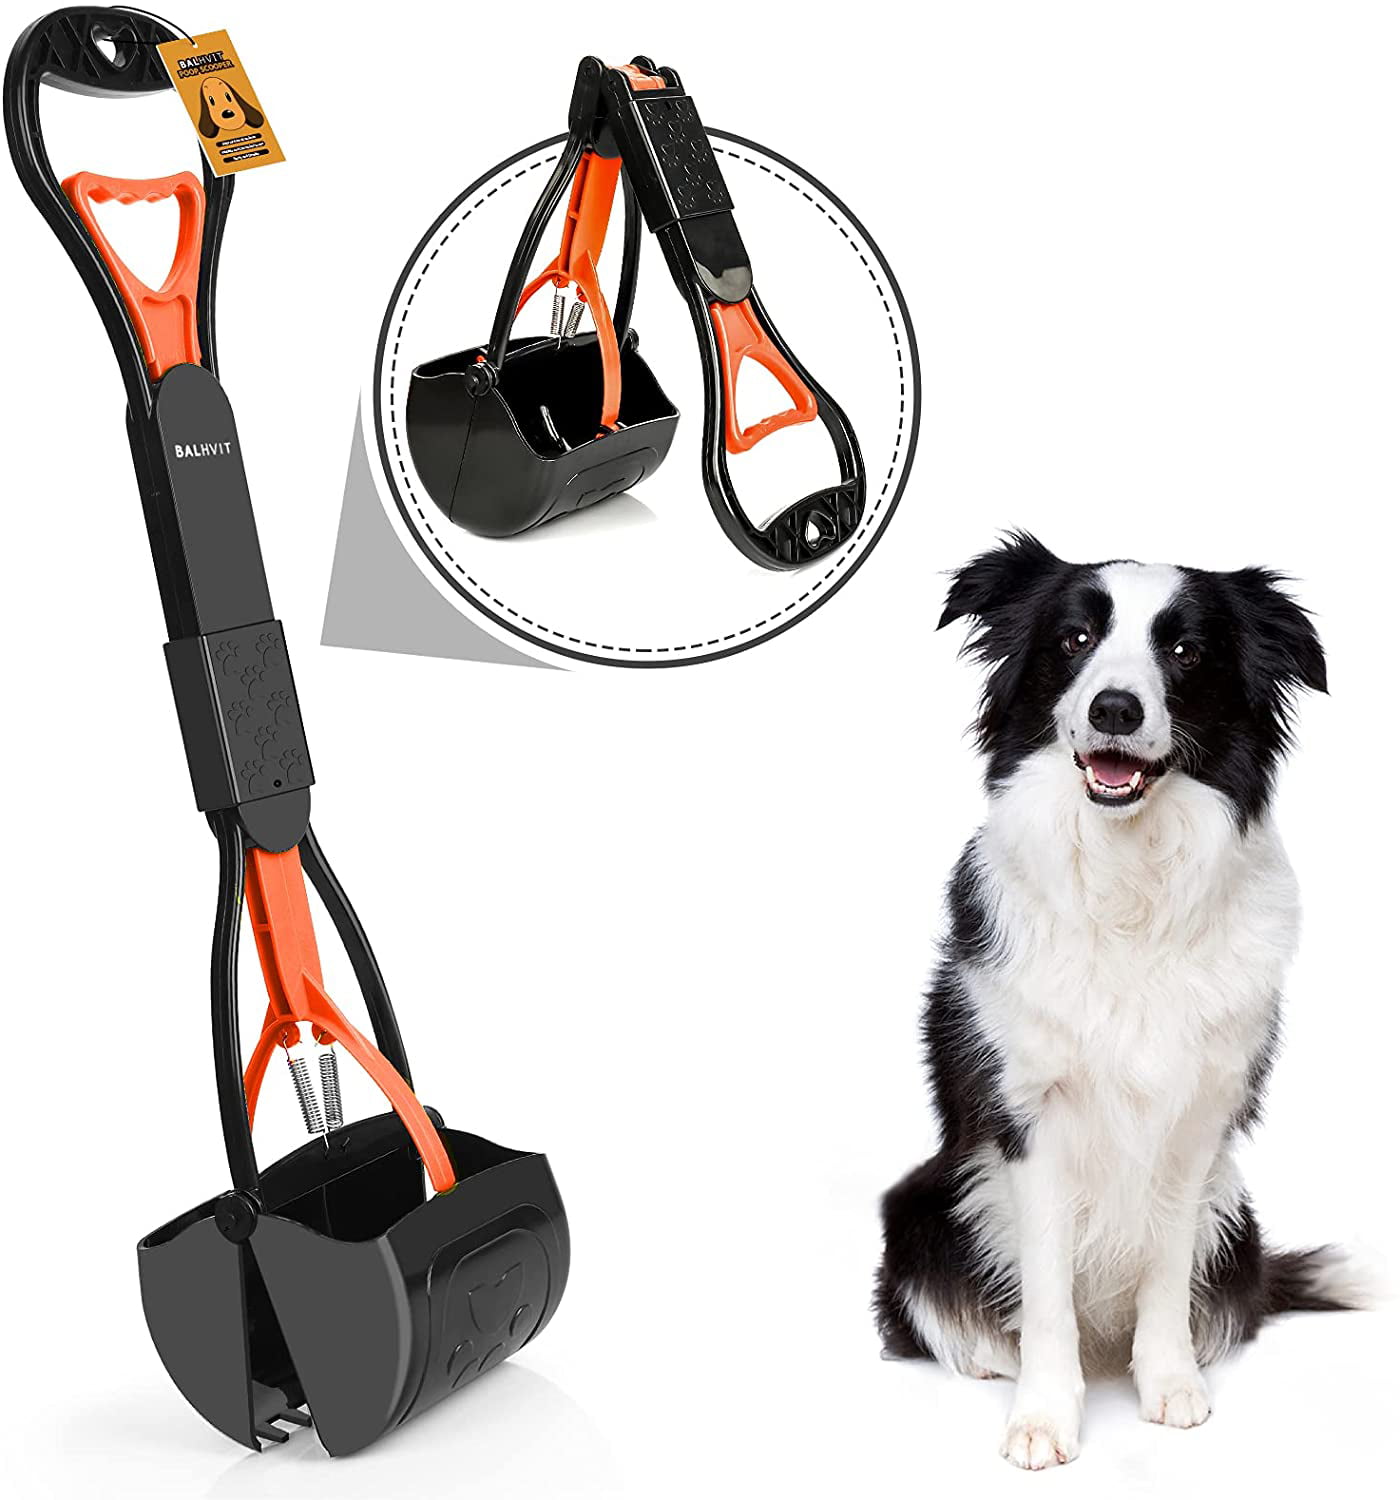 with Non-Breakable High Strength Durable Spring & Premium Materials Balhvit Long Handle Portable Pet Pooper Scooper for Dogs Foldable Dog Poop Waste Pick Up Rake Jaw Claw Bin for Grass and Gravel 